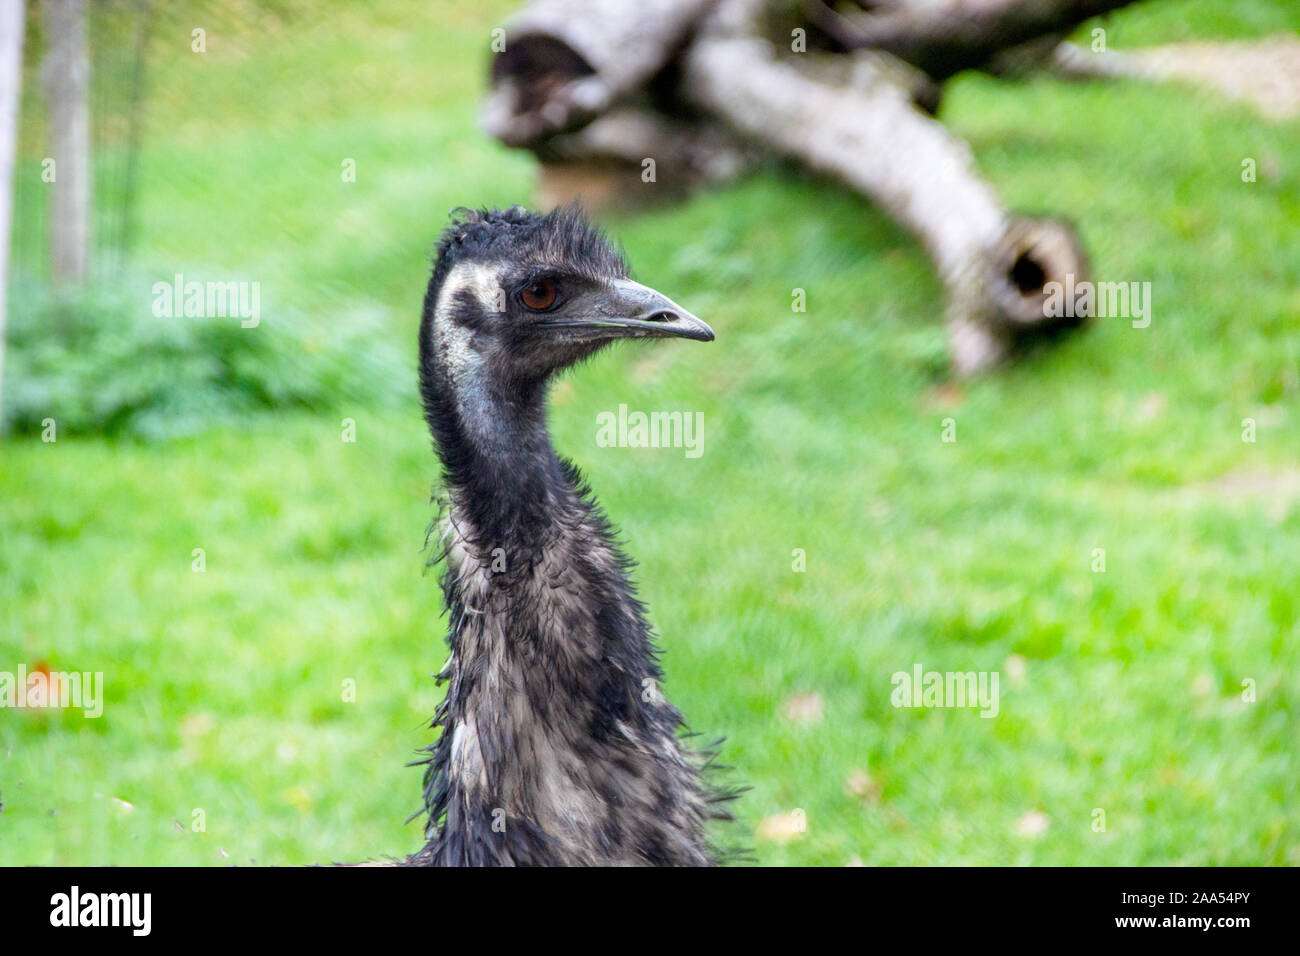 a view from an Emu, Dromaiidae, Dromaius, from the family and genus of flightless ratites from Australia Stock Photo